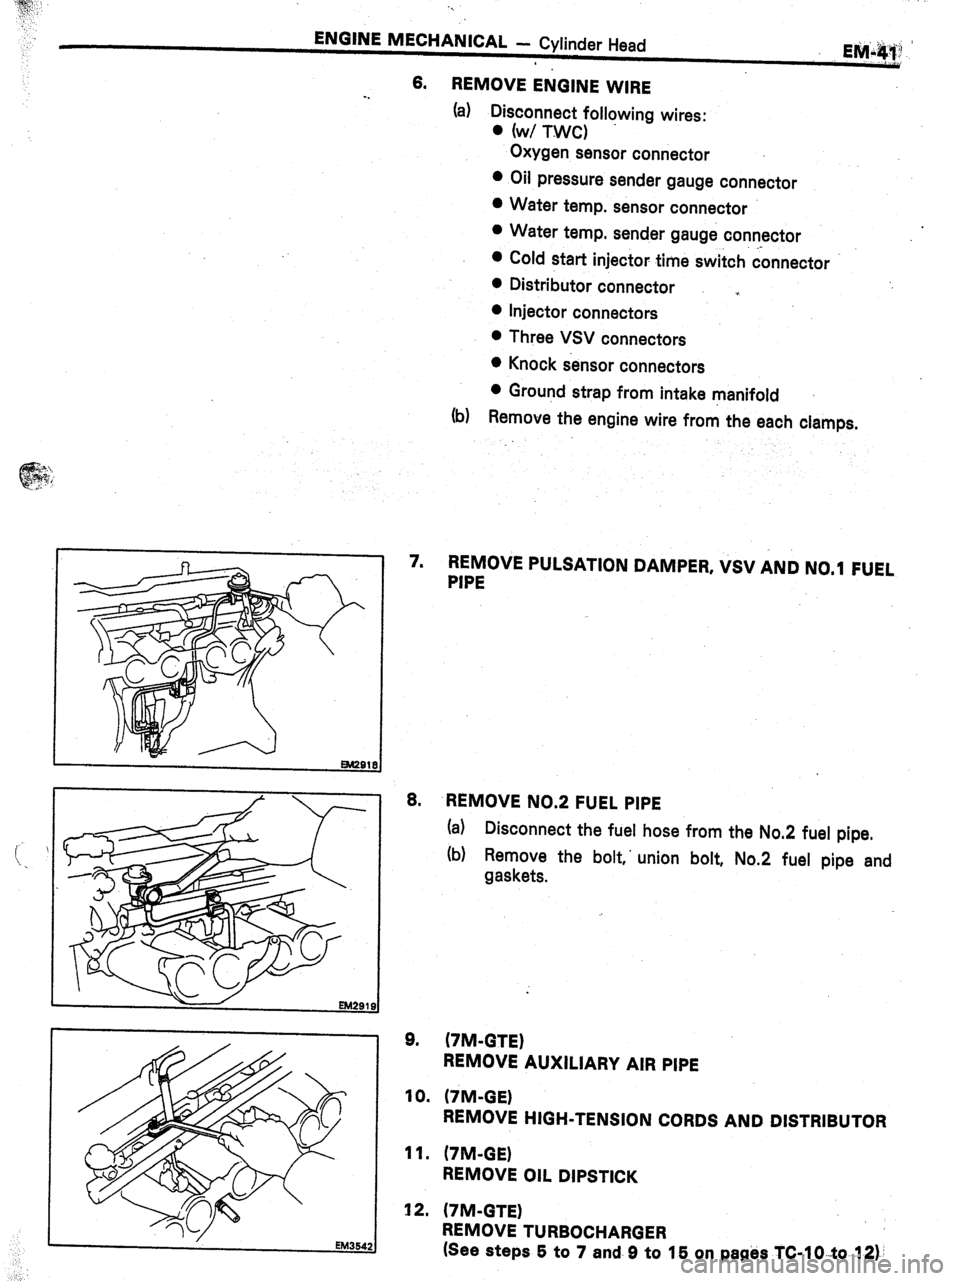 TOYOTA CELICA 1987  Service Repair Manual . 
ENGINE MECHANICAL - Cylinder Head 
-. 6. REMOVE ENGINE WIRE 
(a) Disconnect following wires: 
. fw/ TWC) 
Oxygen sensor connector 
l Oil pressure sender gauge connector 
l Water temp. sensor connec